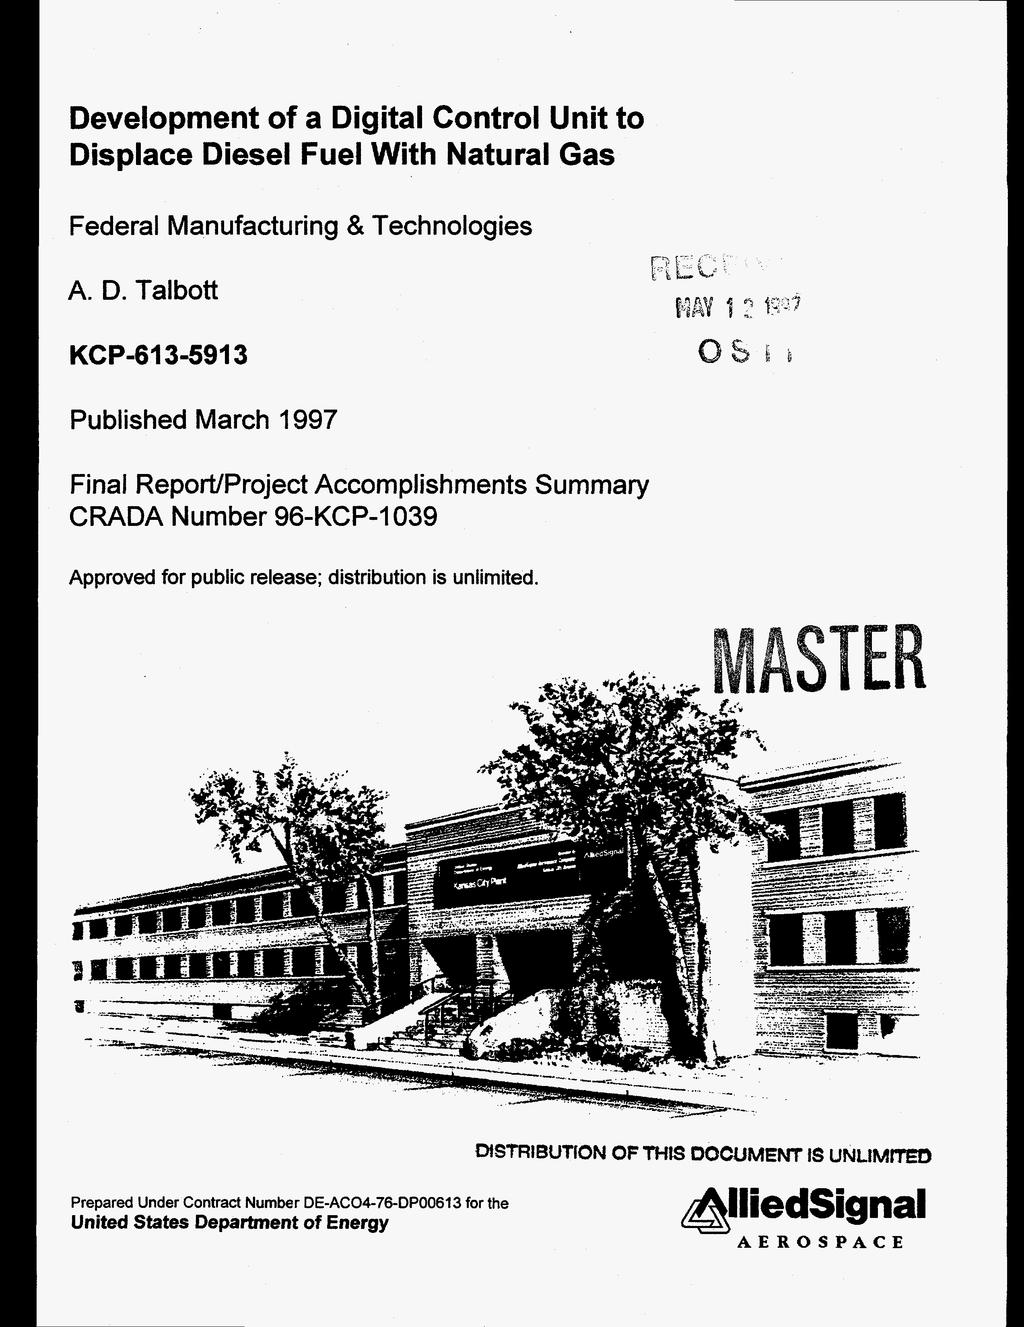 Development of a Digital Control Unit to Displace Diesel Fuel With Natural Gas Federal Manufacturing & Tech nolog ies A. D. Talbott KCP-613-5913 I Published March 1997 Final ReporVProject Accomplishments Summary CRADA Number 96-KCP-1039 Approved for public release; distribution is unlimited.